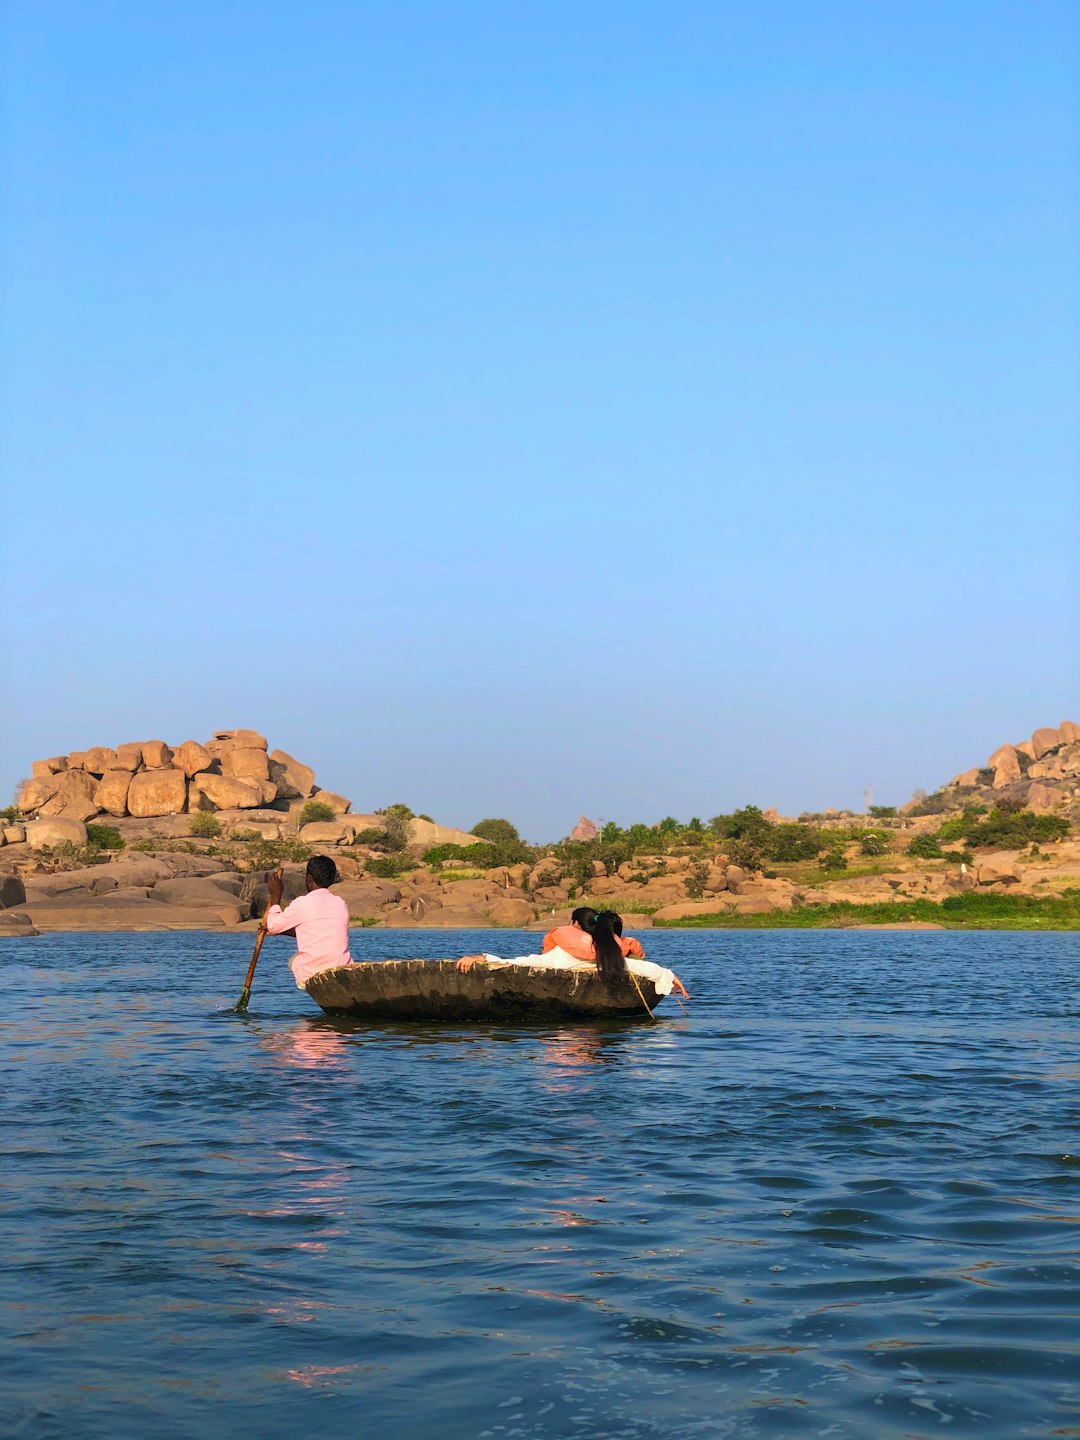 travelers stories about Lake in Hampi, India